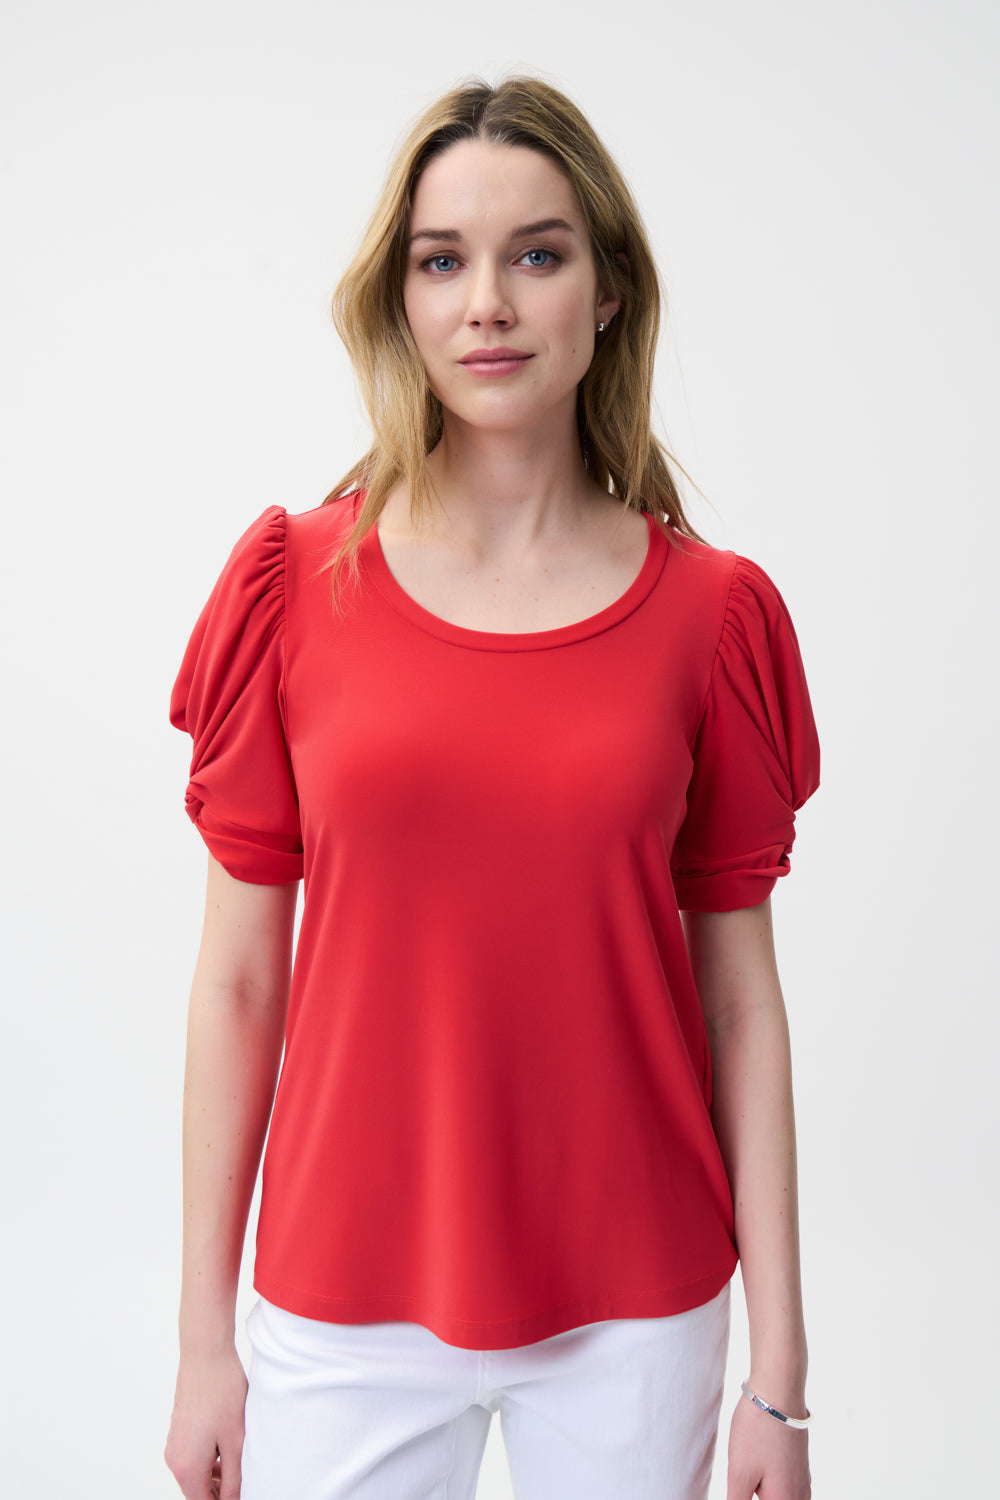 Joseph Ribkoff Lacquer Red Puffed Sleeve Top Style 221157